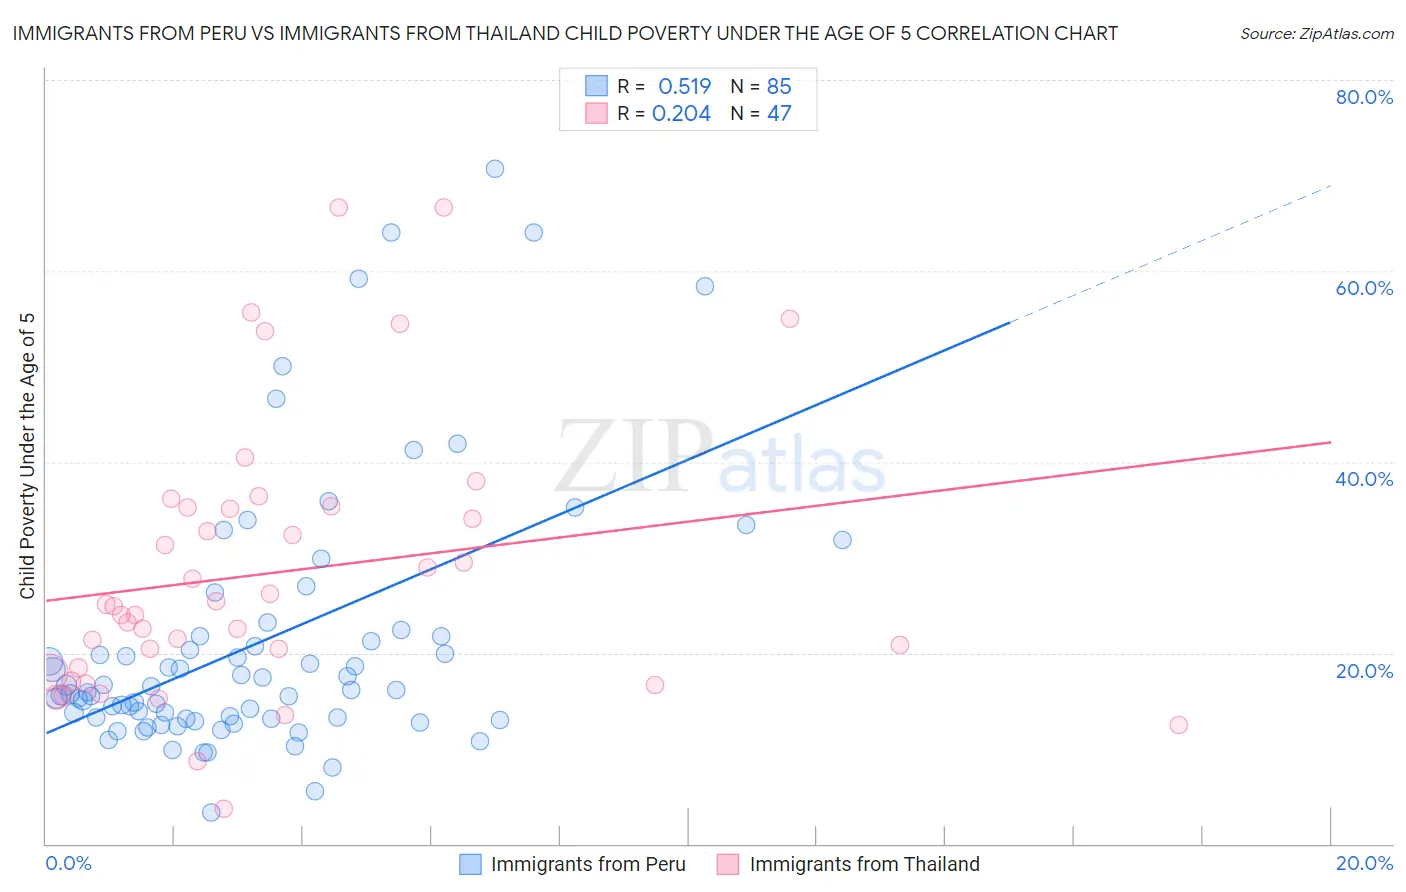 Immigrants from Peru vs Immigrants from Thailand Child Poverty Under the Age of 5